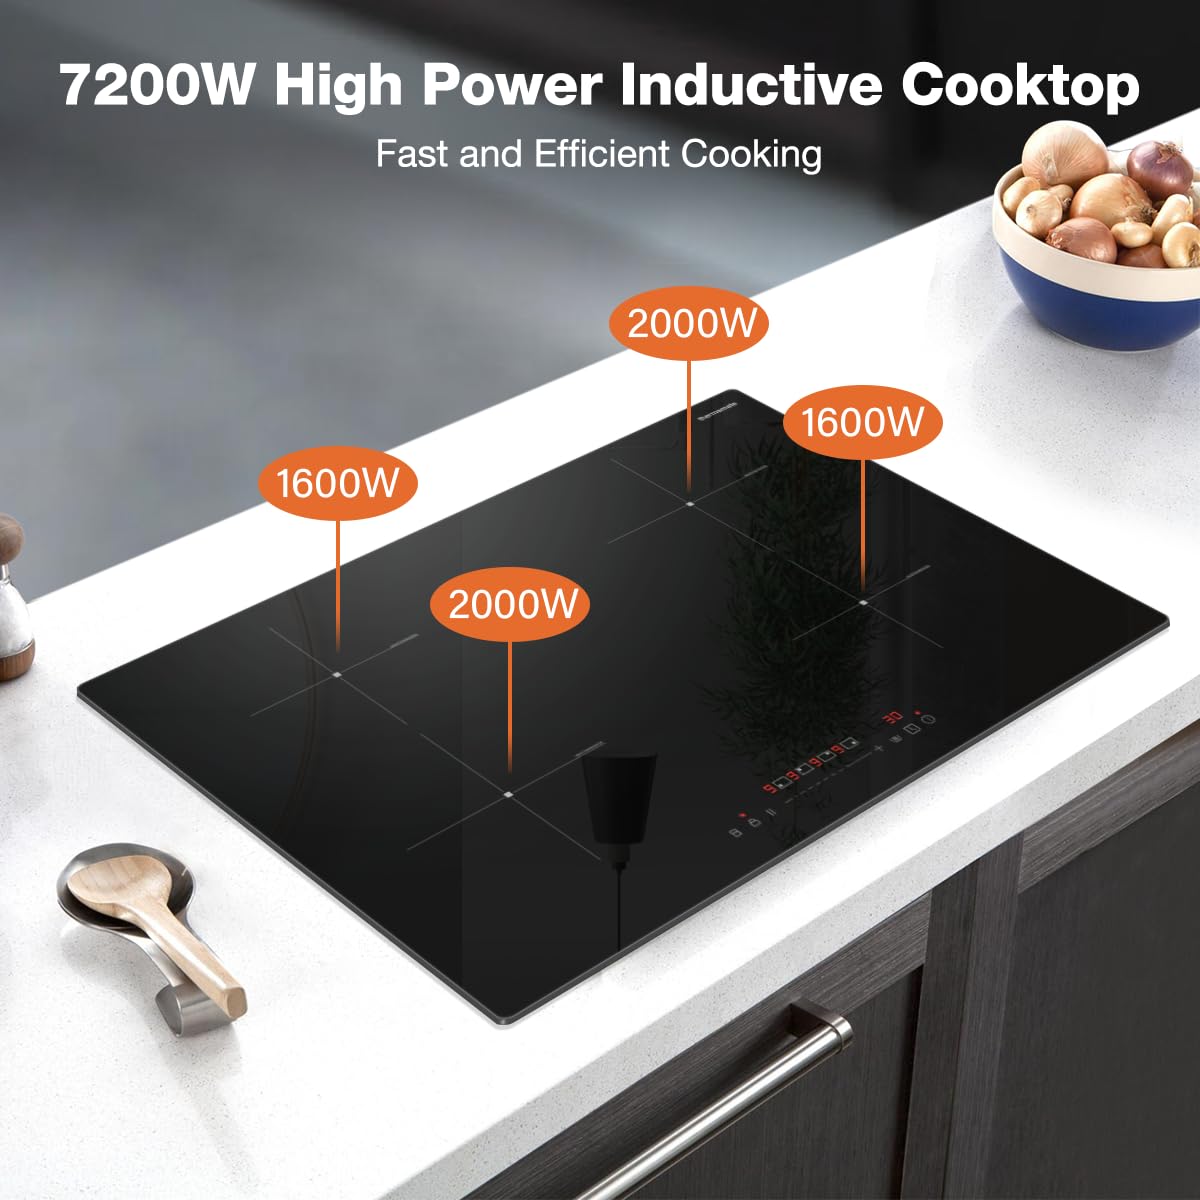 7200W High Power Inductive Cooktop Fast and Efficient Cooking | Thermomate